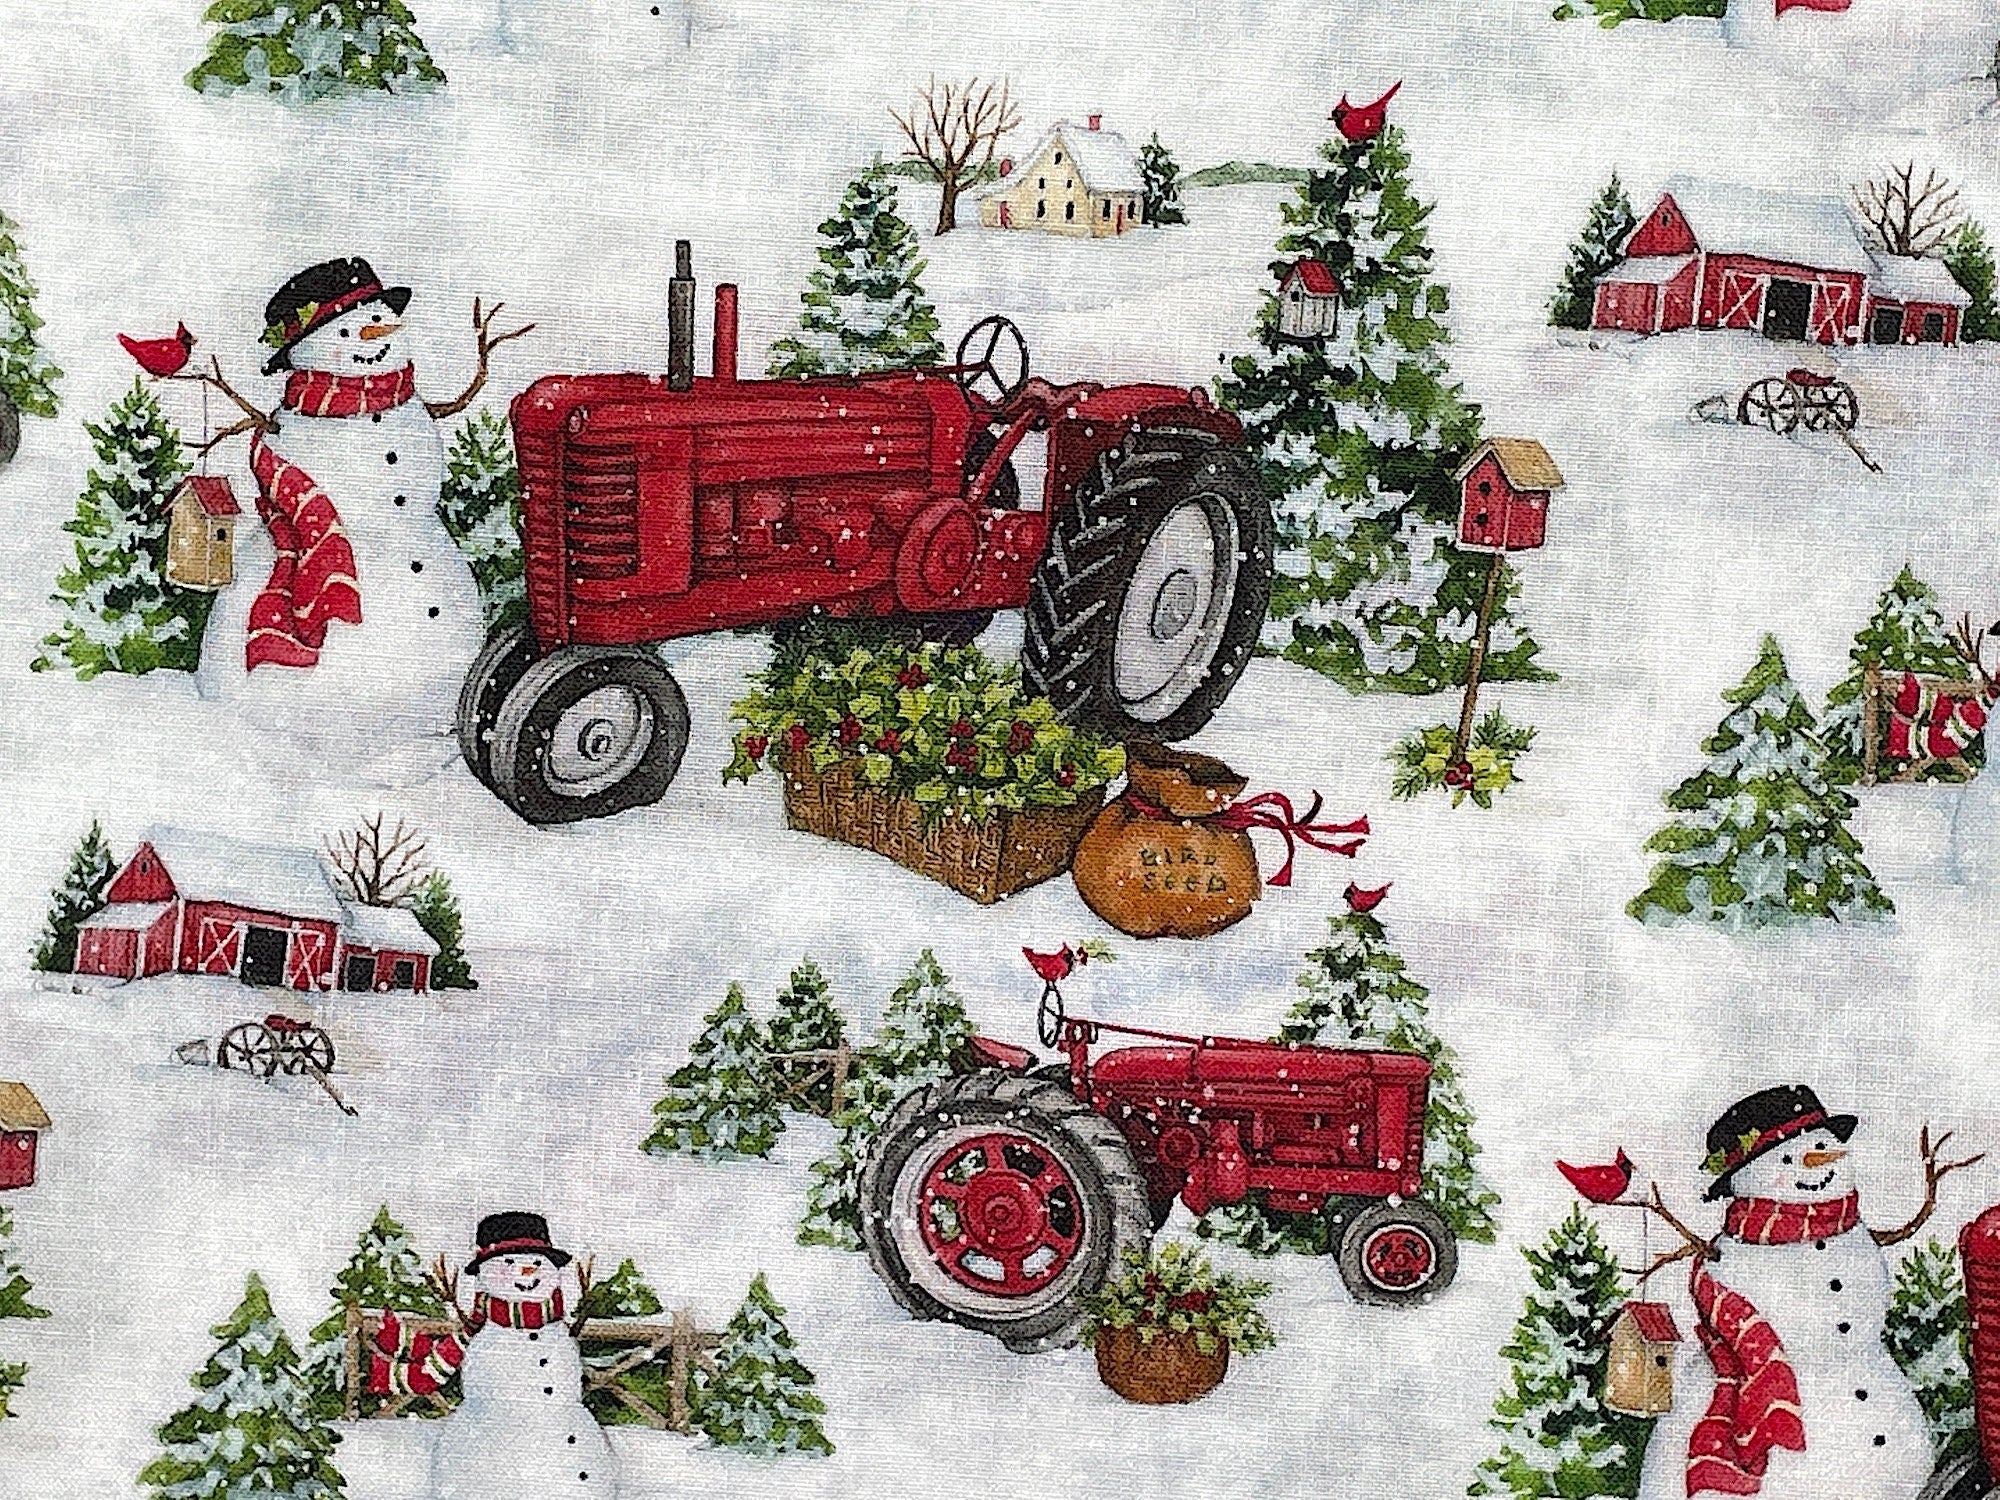 Close up of red tractors, snowmen, trees in the snow.